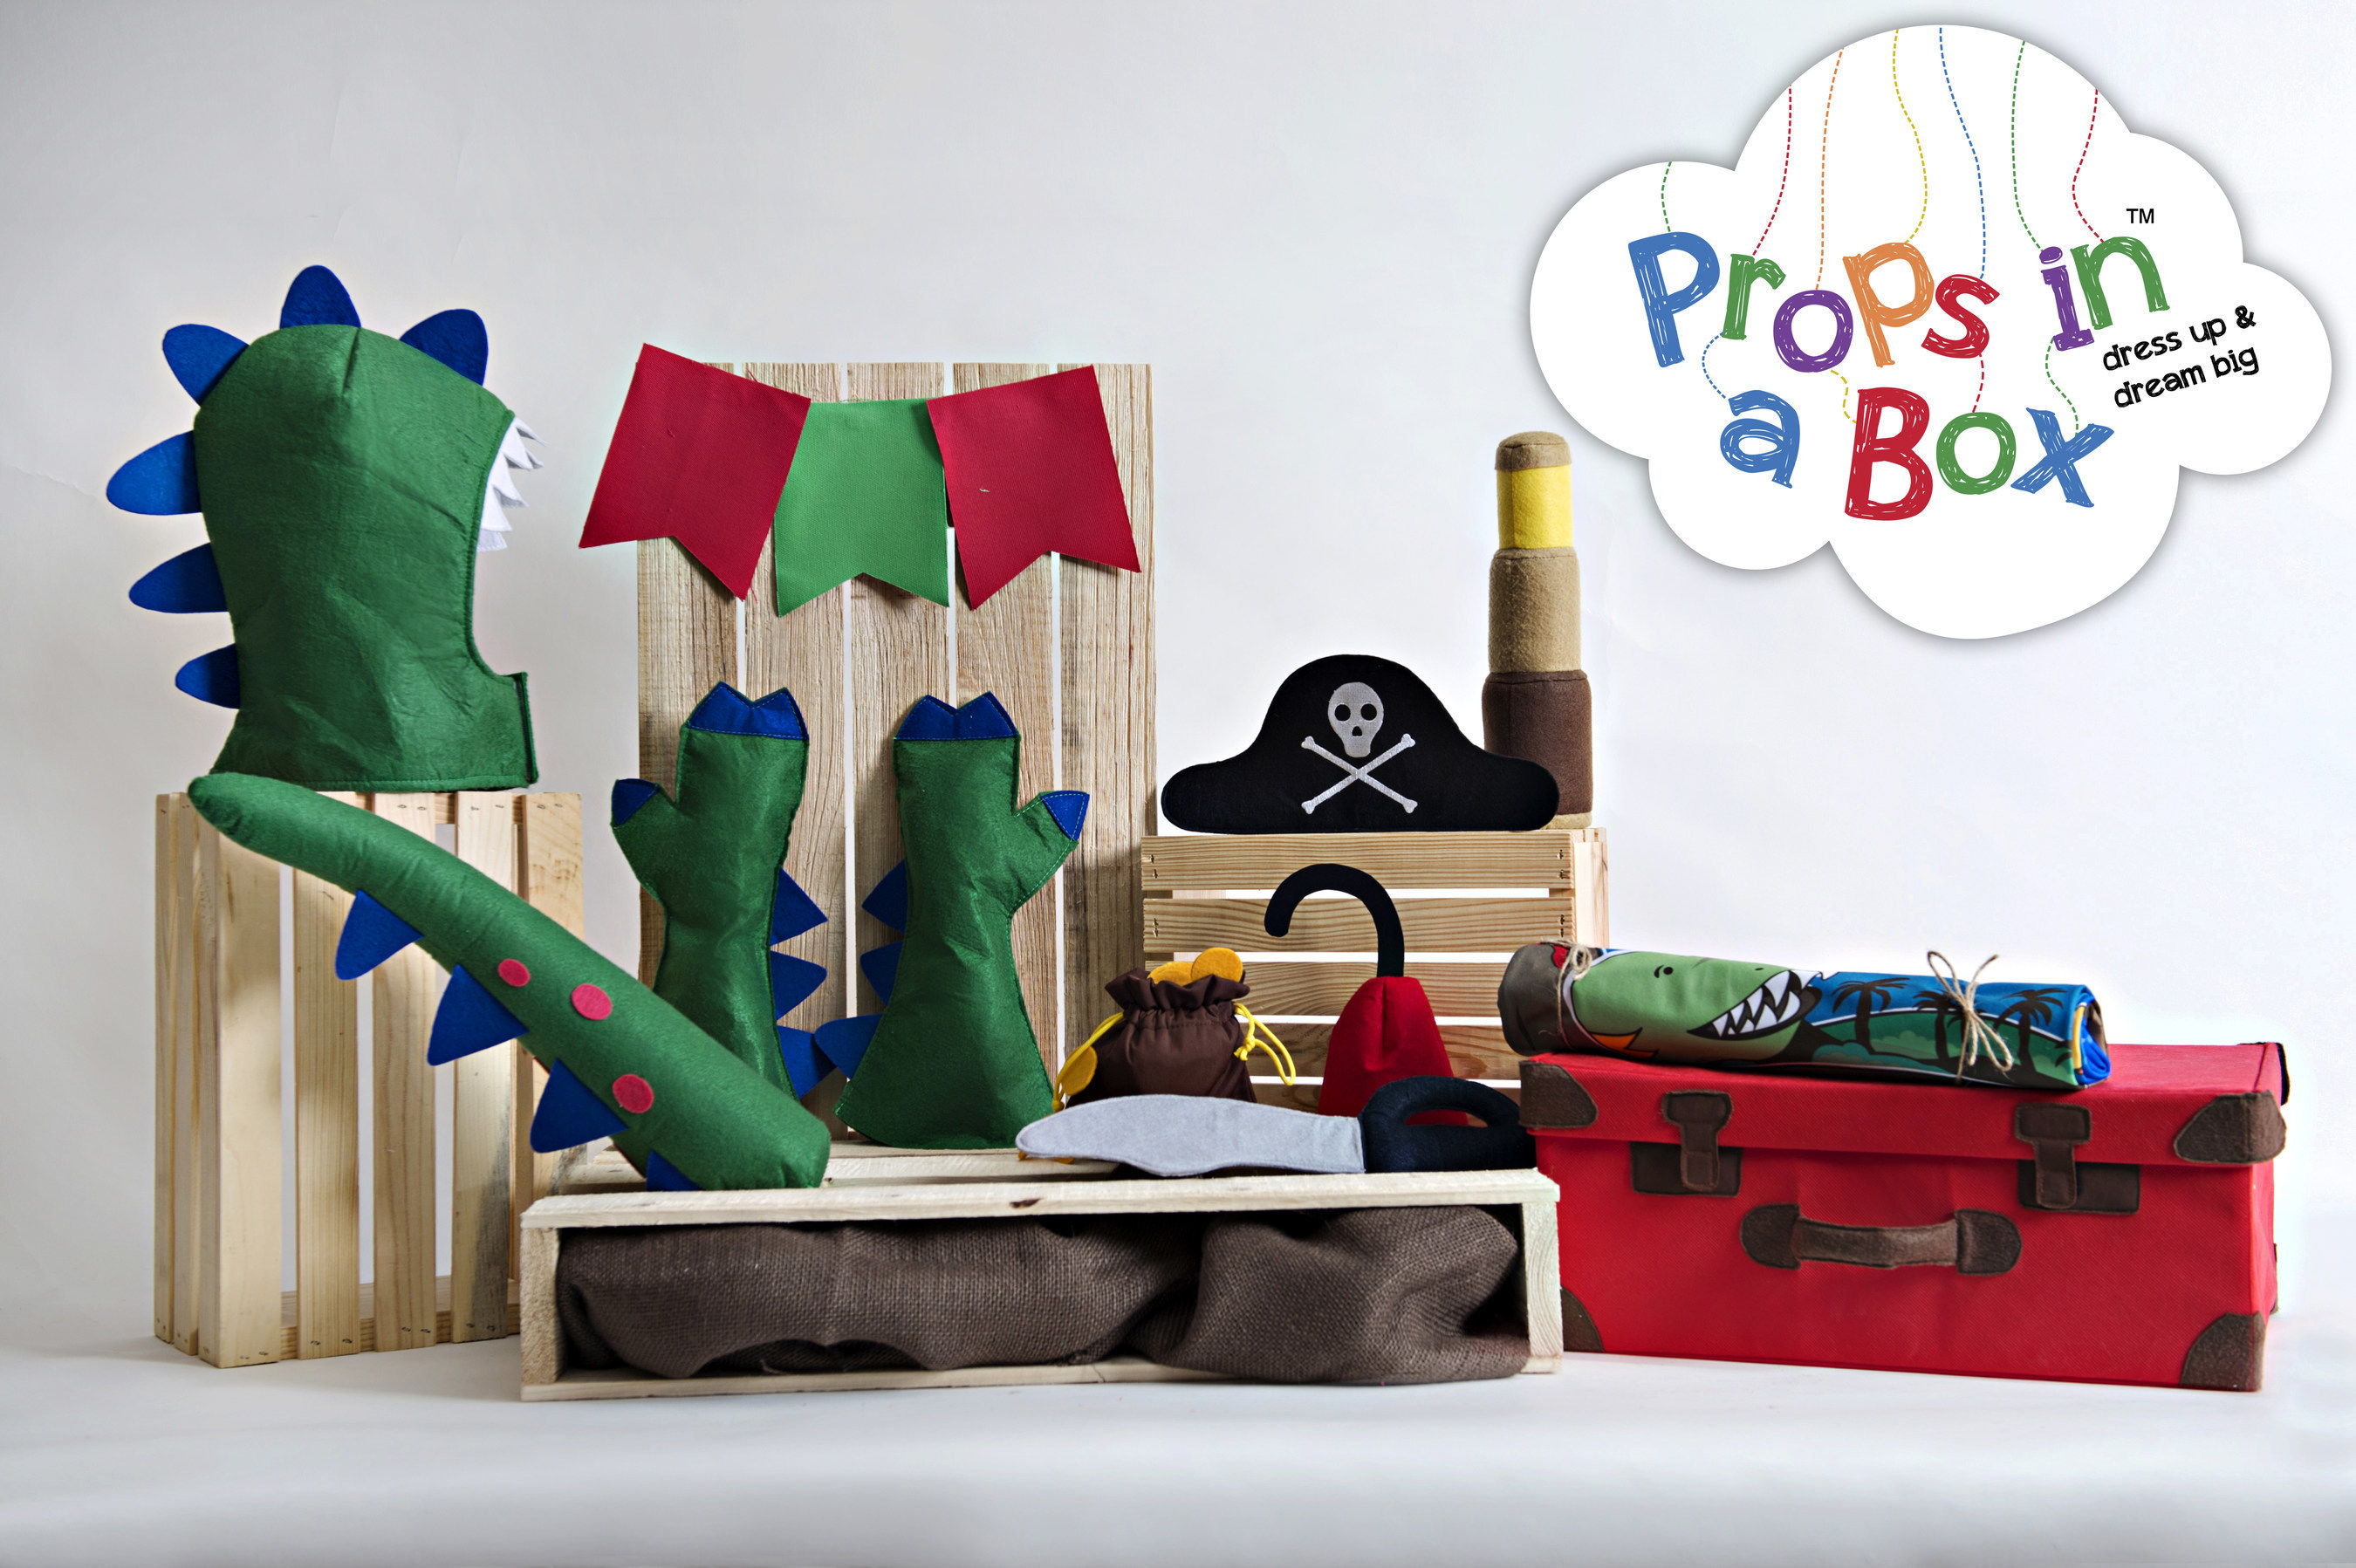 Props in a Box & Props in a Bag, available now at Toy R Us locations nationwide, lets kids dress up and dream big!